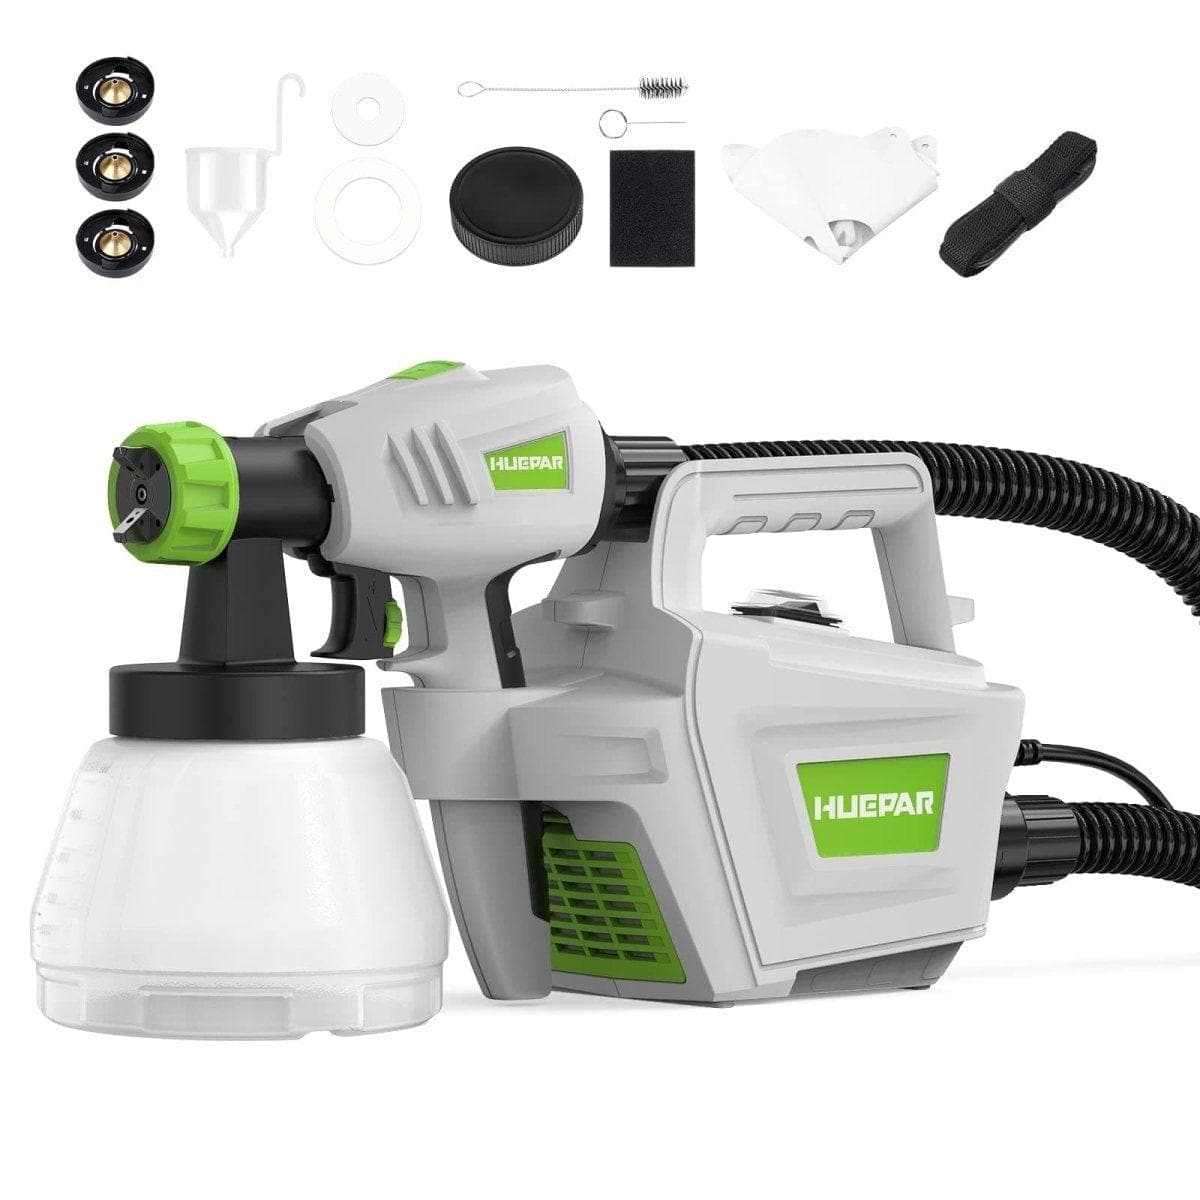 Huepar Tools SG800 HVLP electric paint sprayer with 4 metal nozzles and 3 patterns, ideal for home interior and exterior walls, house painting, ceiling, fence, cabinet, chair5